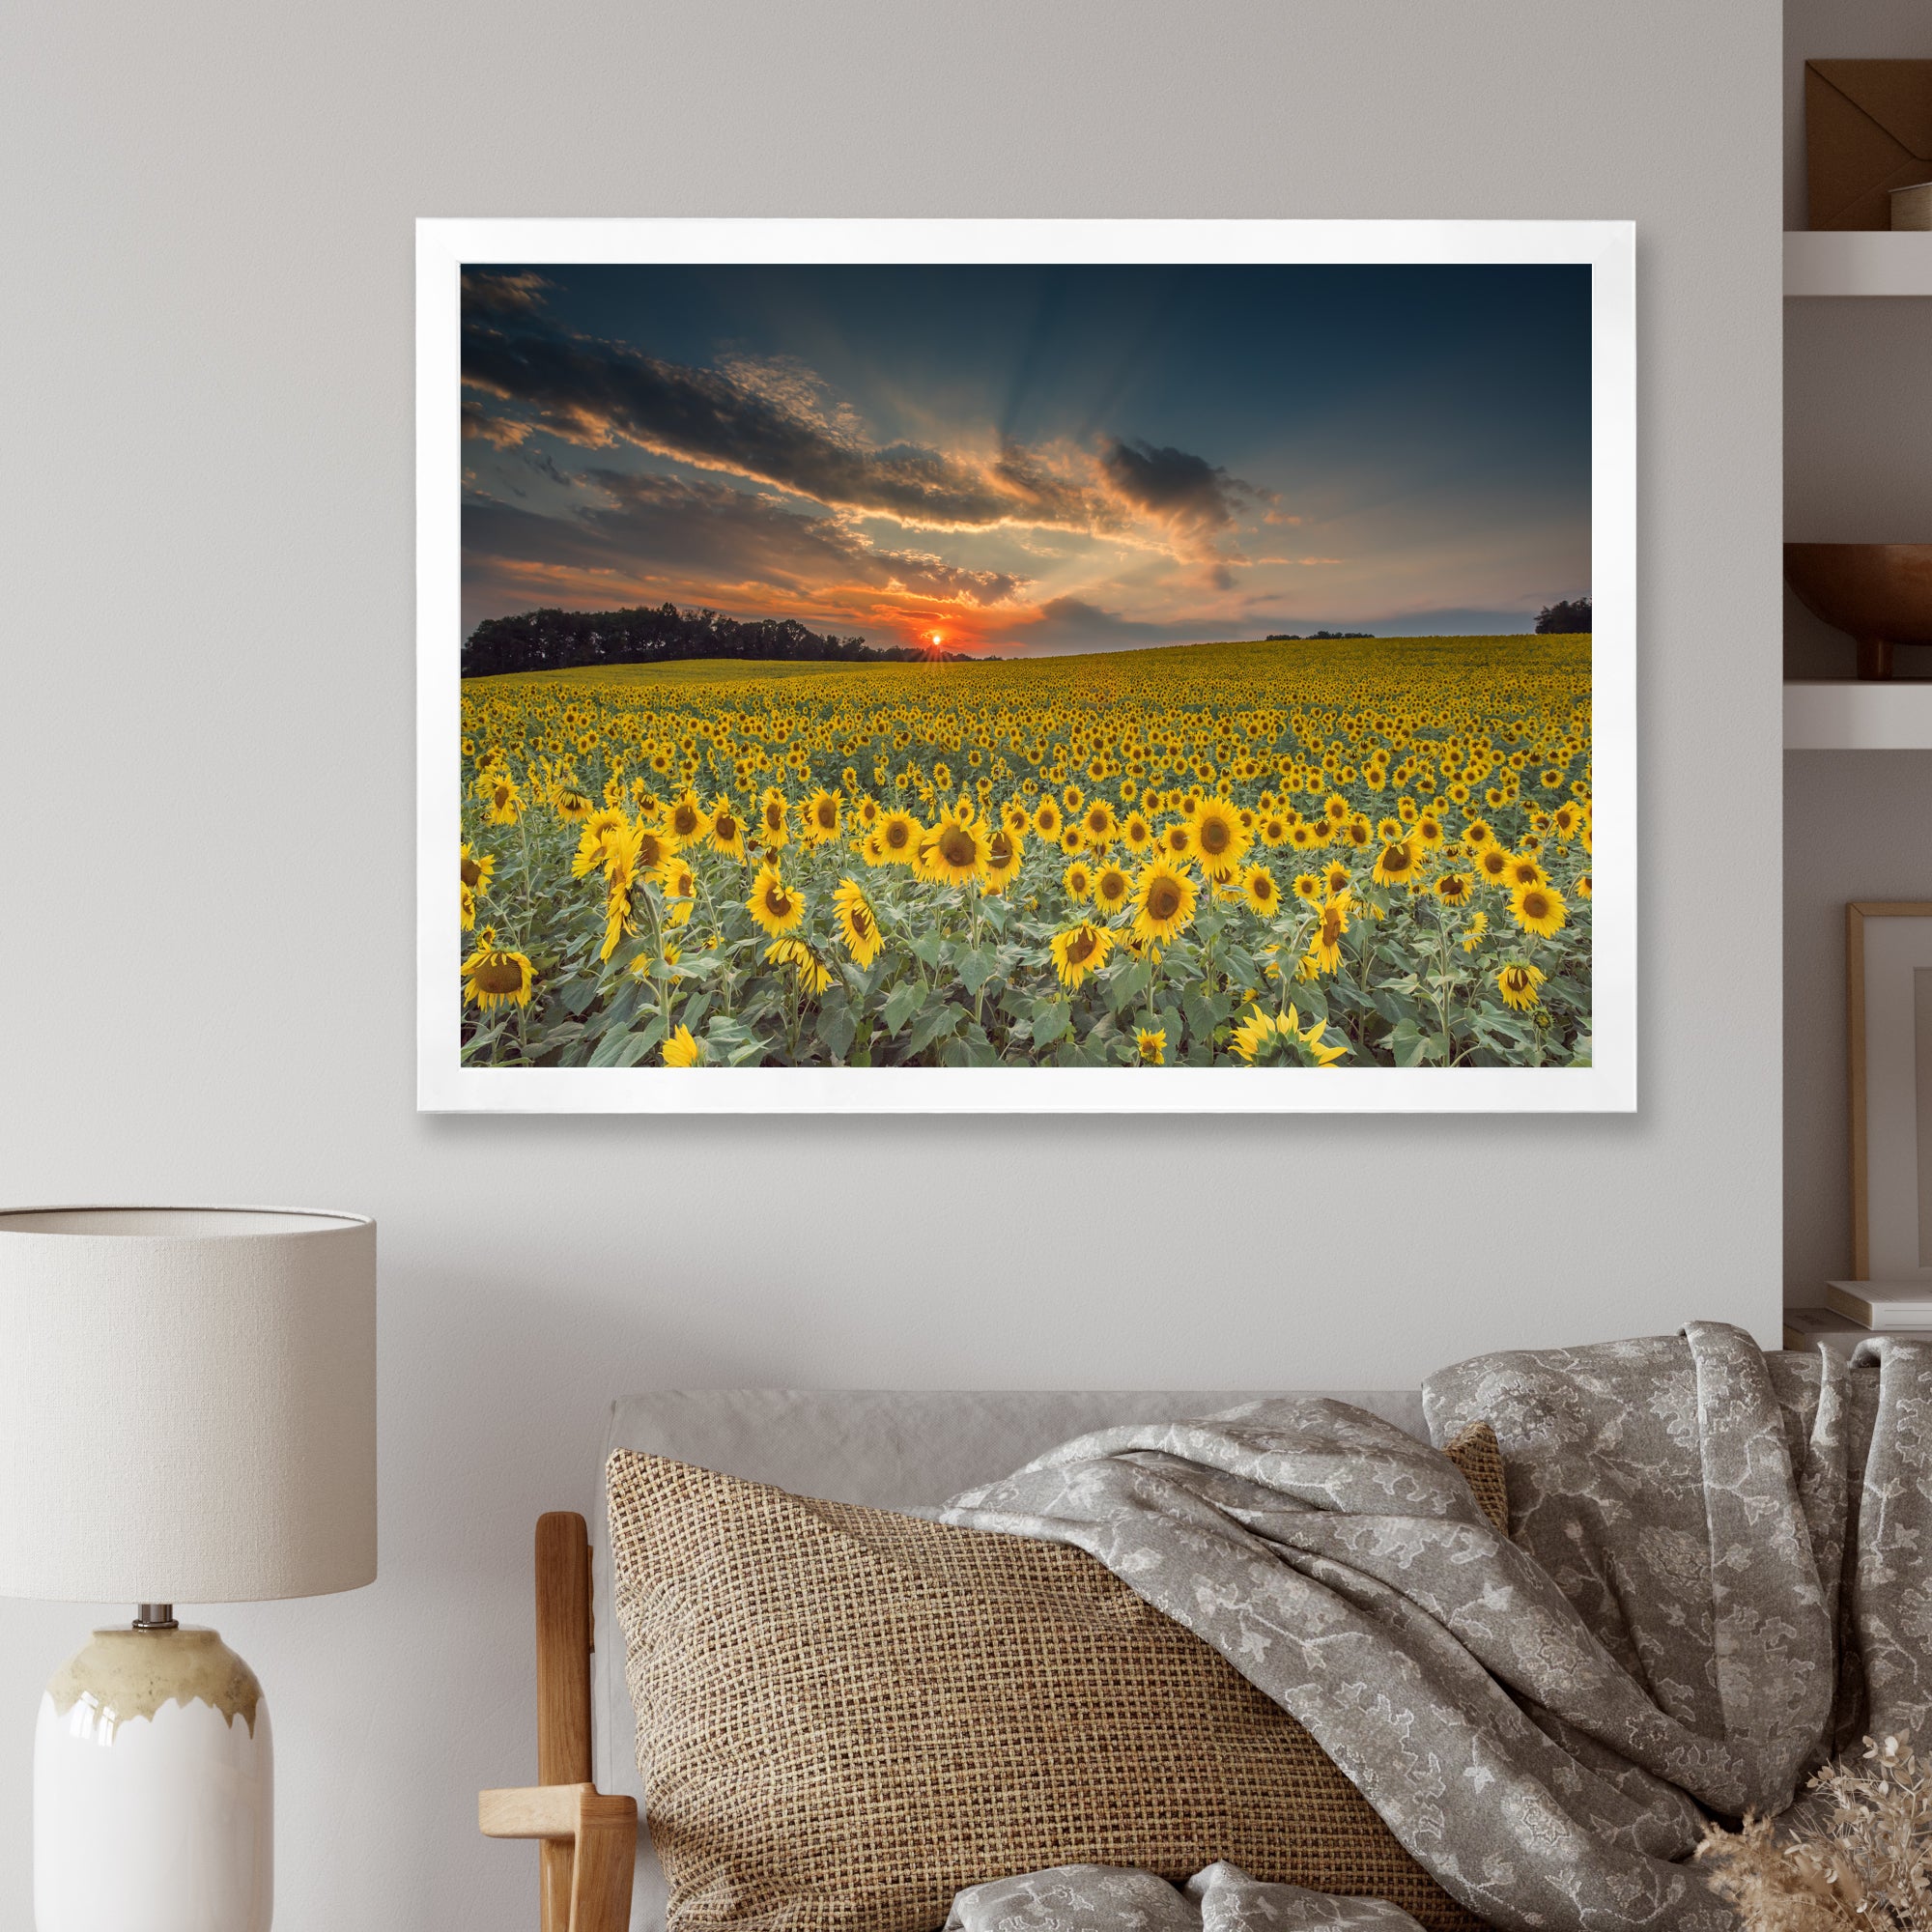 Sunflower Sunset with Cloudy Sky